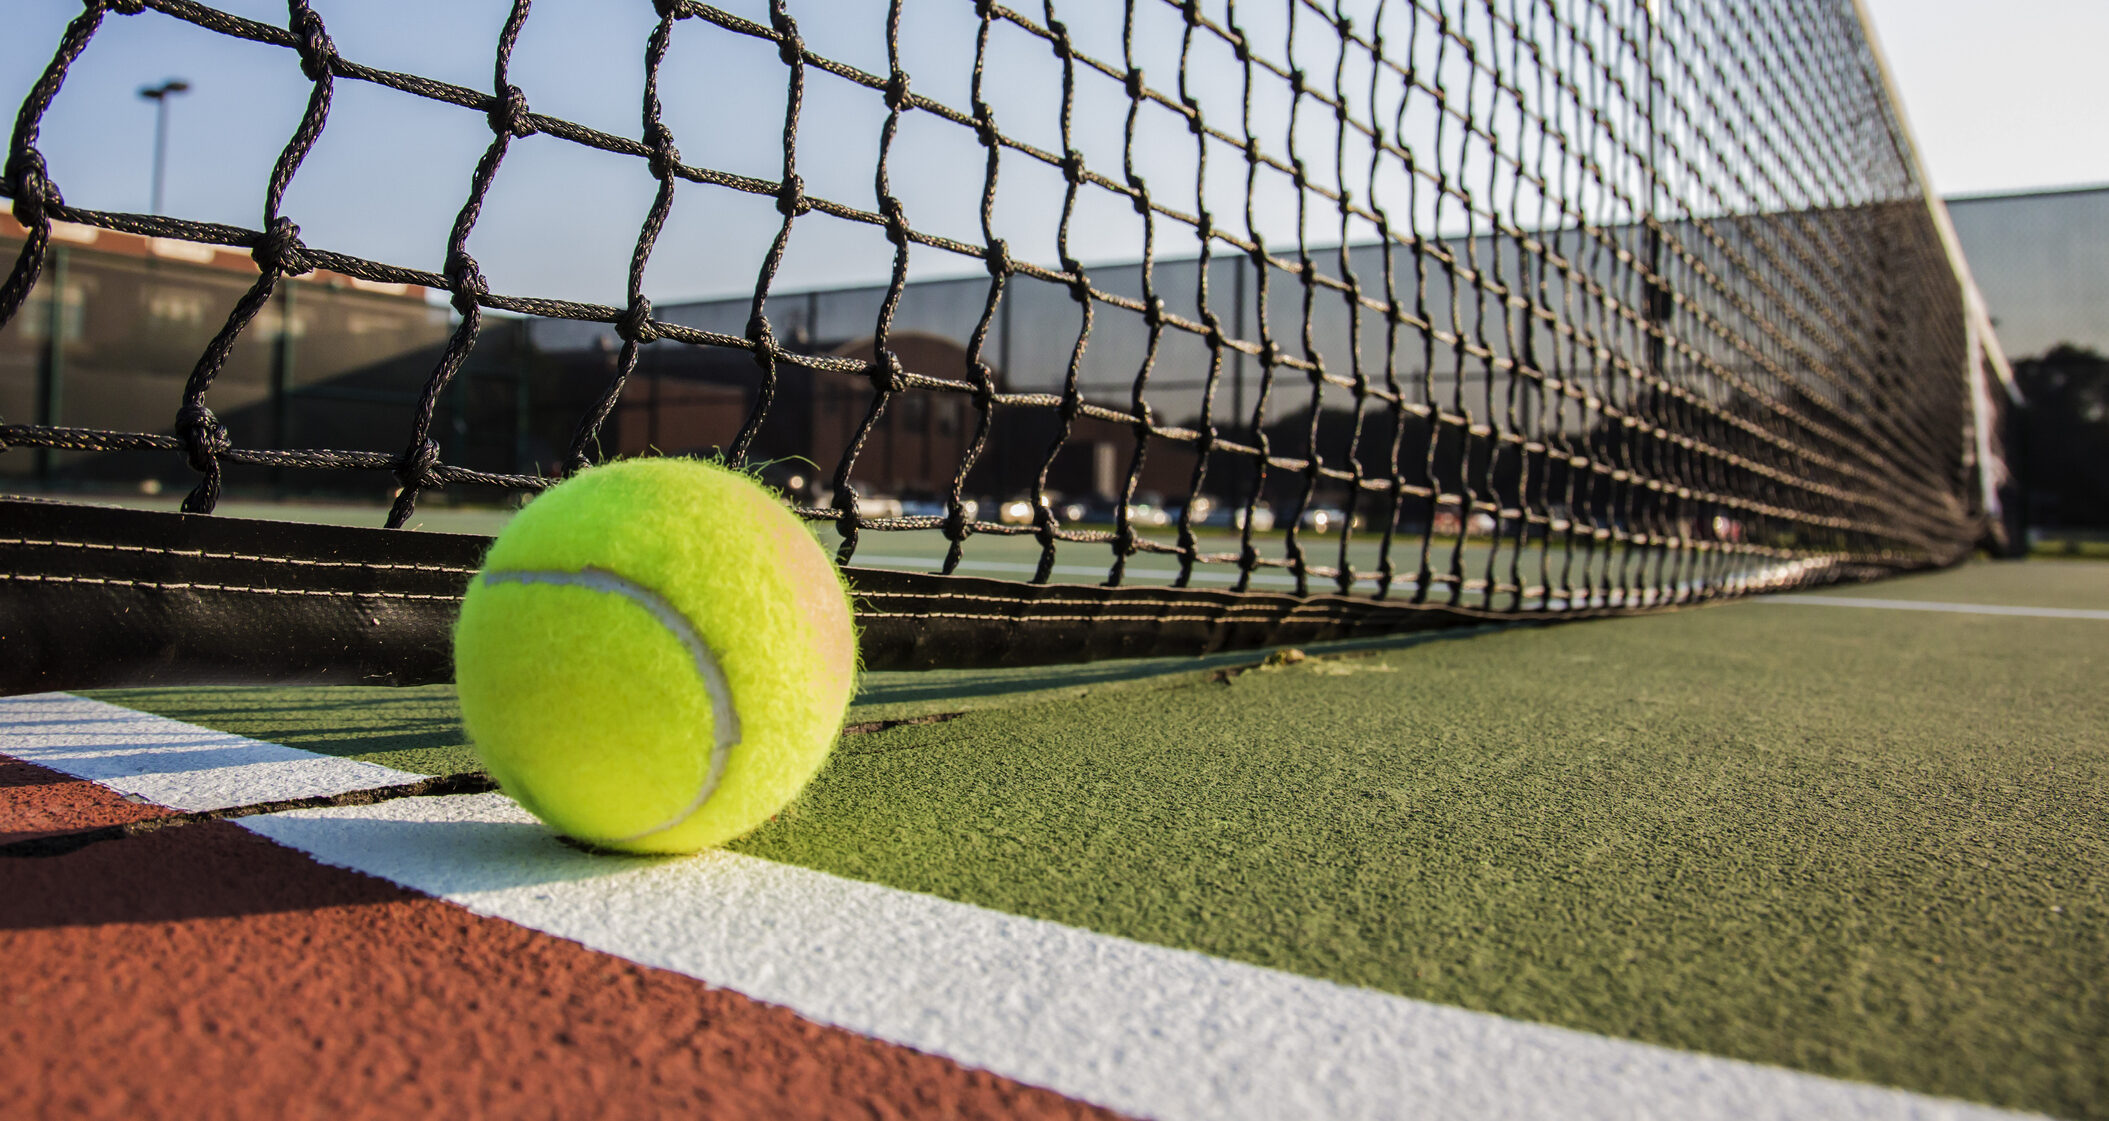 berks-county-tennis-court-construction-fast-surfaces